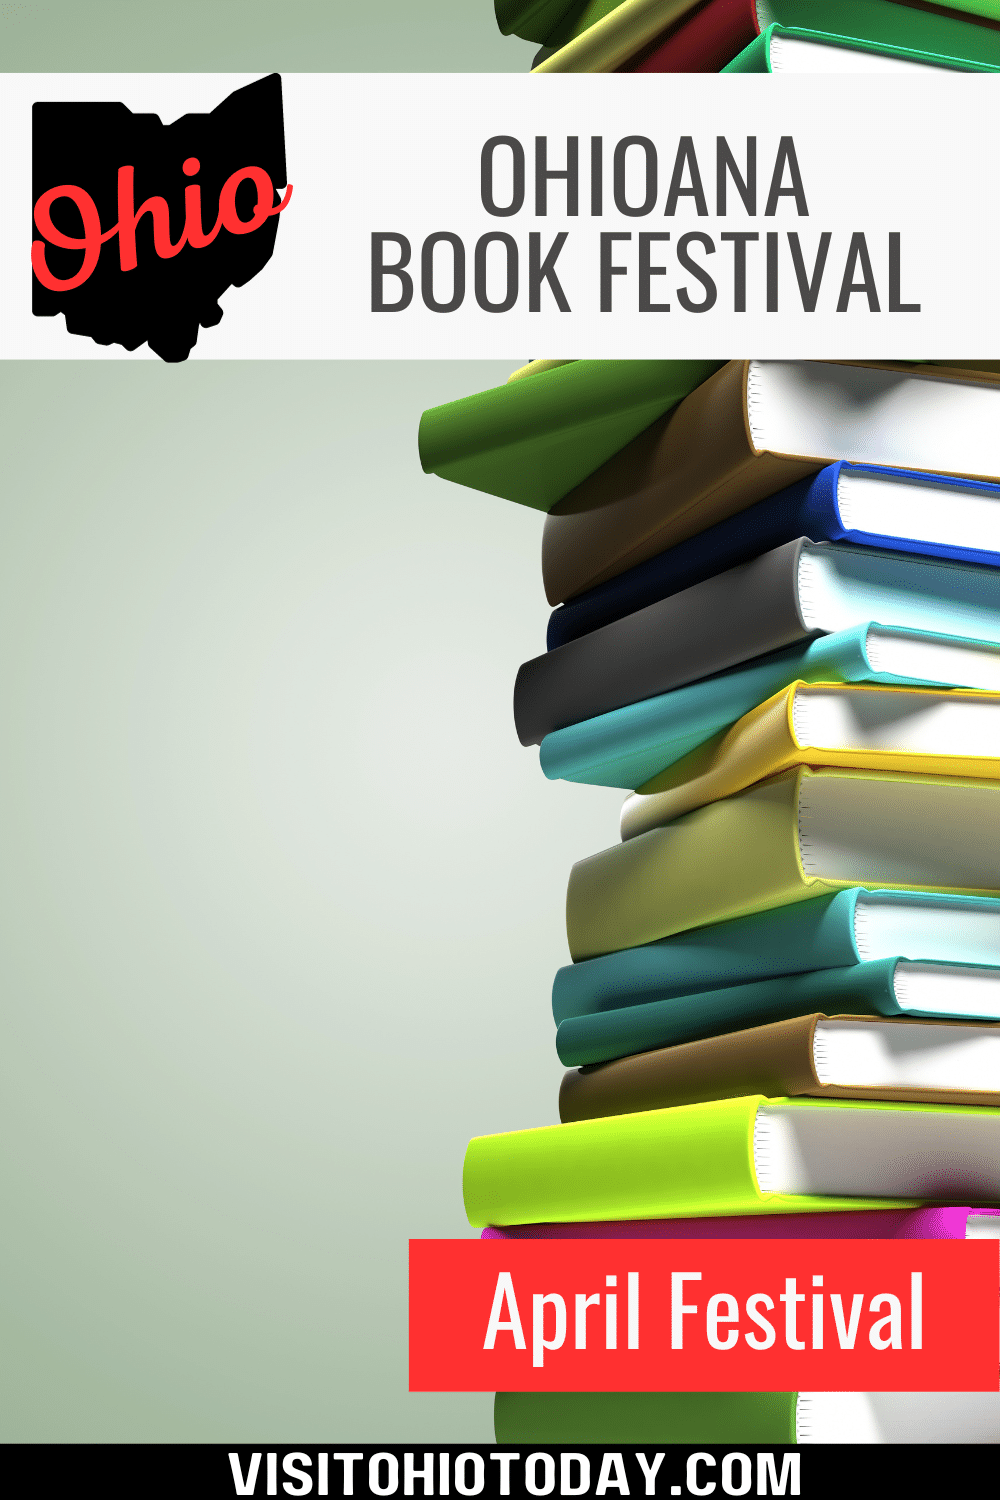 The 18th annual Ohioana Book Festival will be held at Columbus Metropolitan Library’s main library in mid-April to recognize Ohio writers and their books.